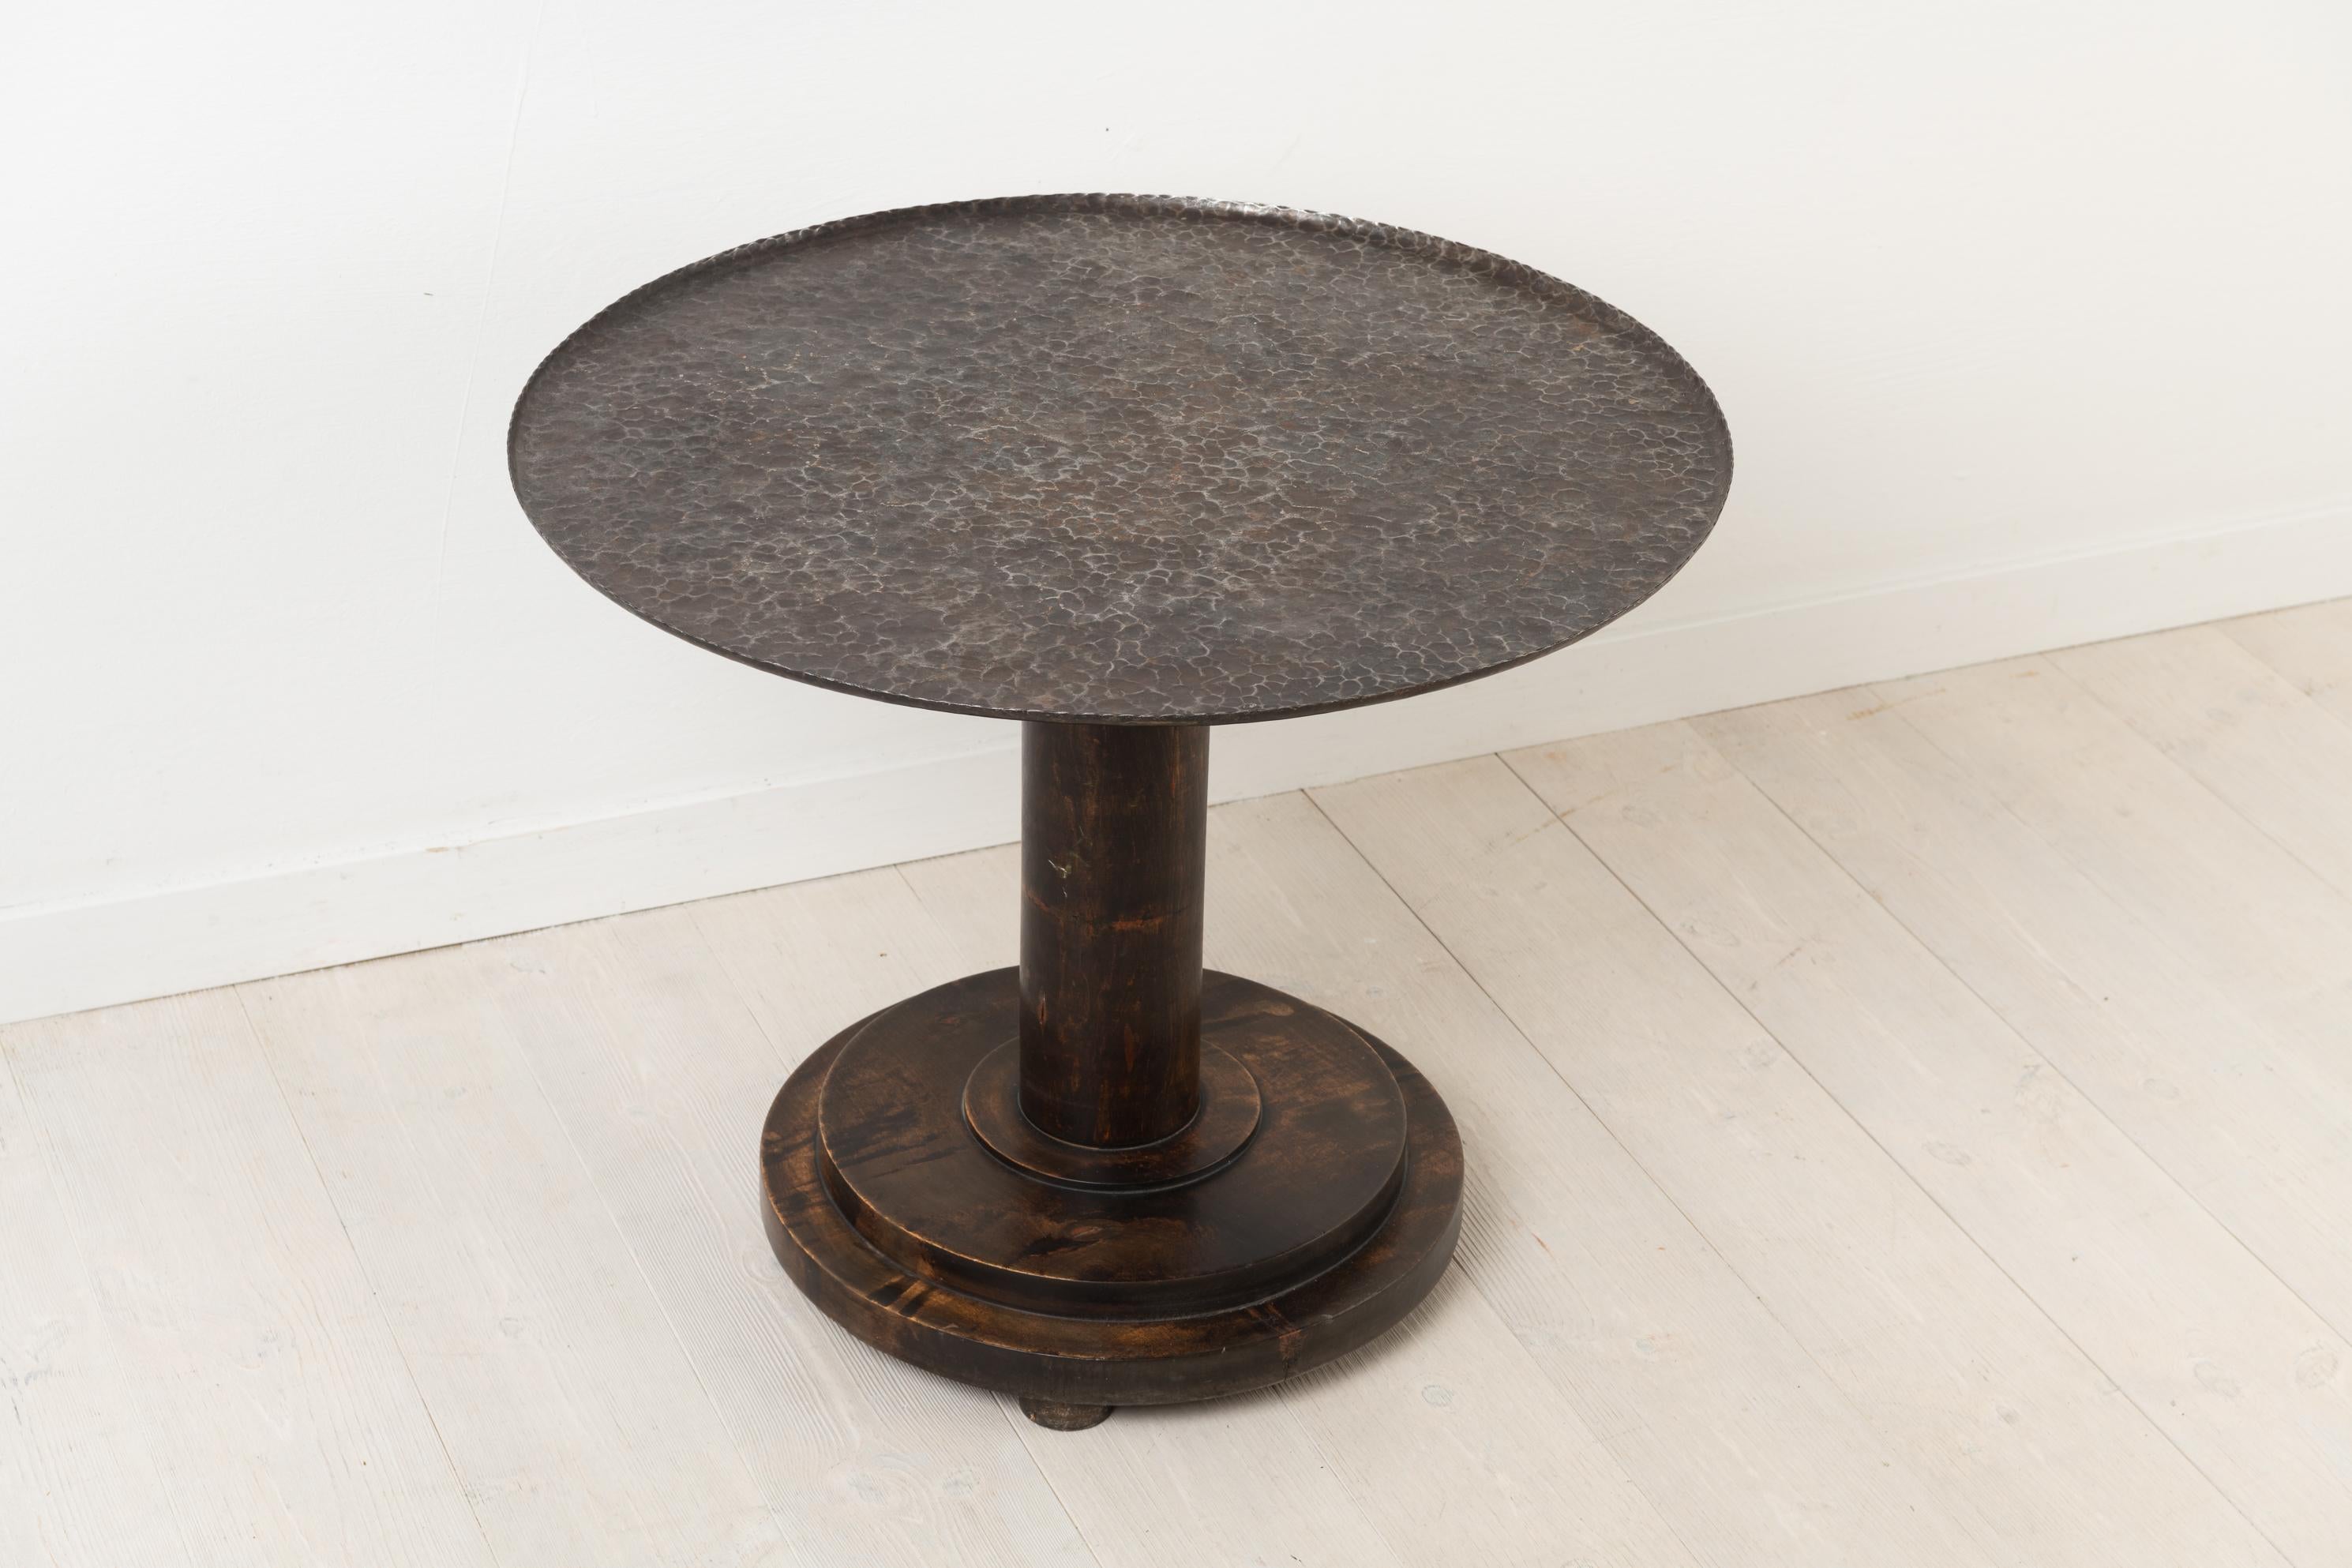 20th Century Round Art Deco Table with Iron Table Top